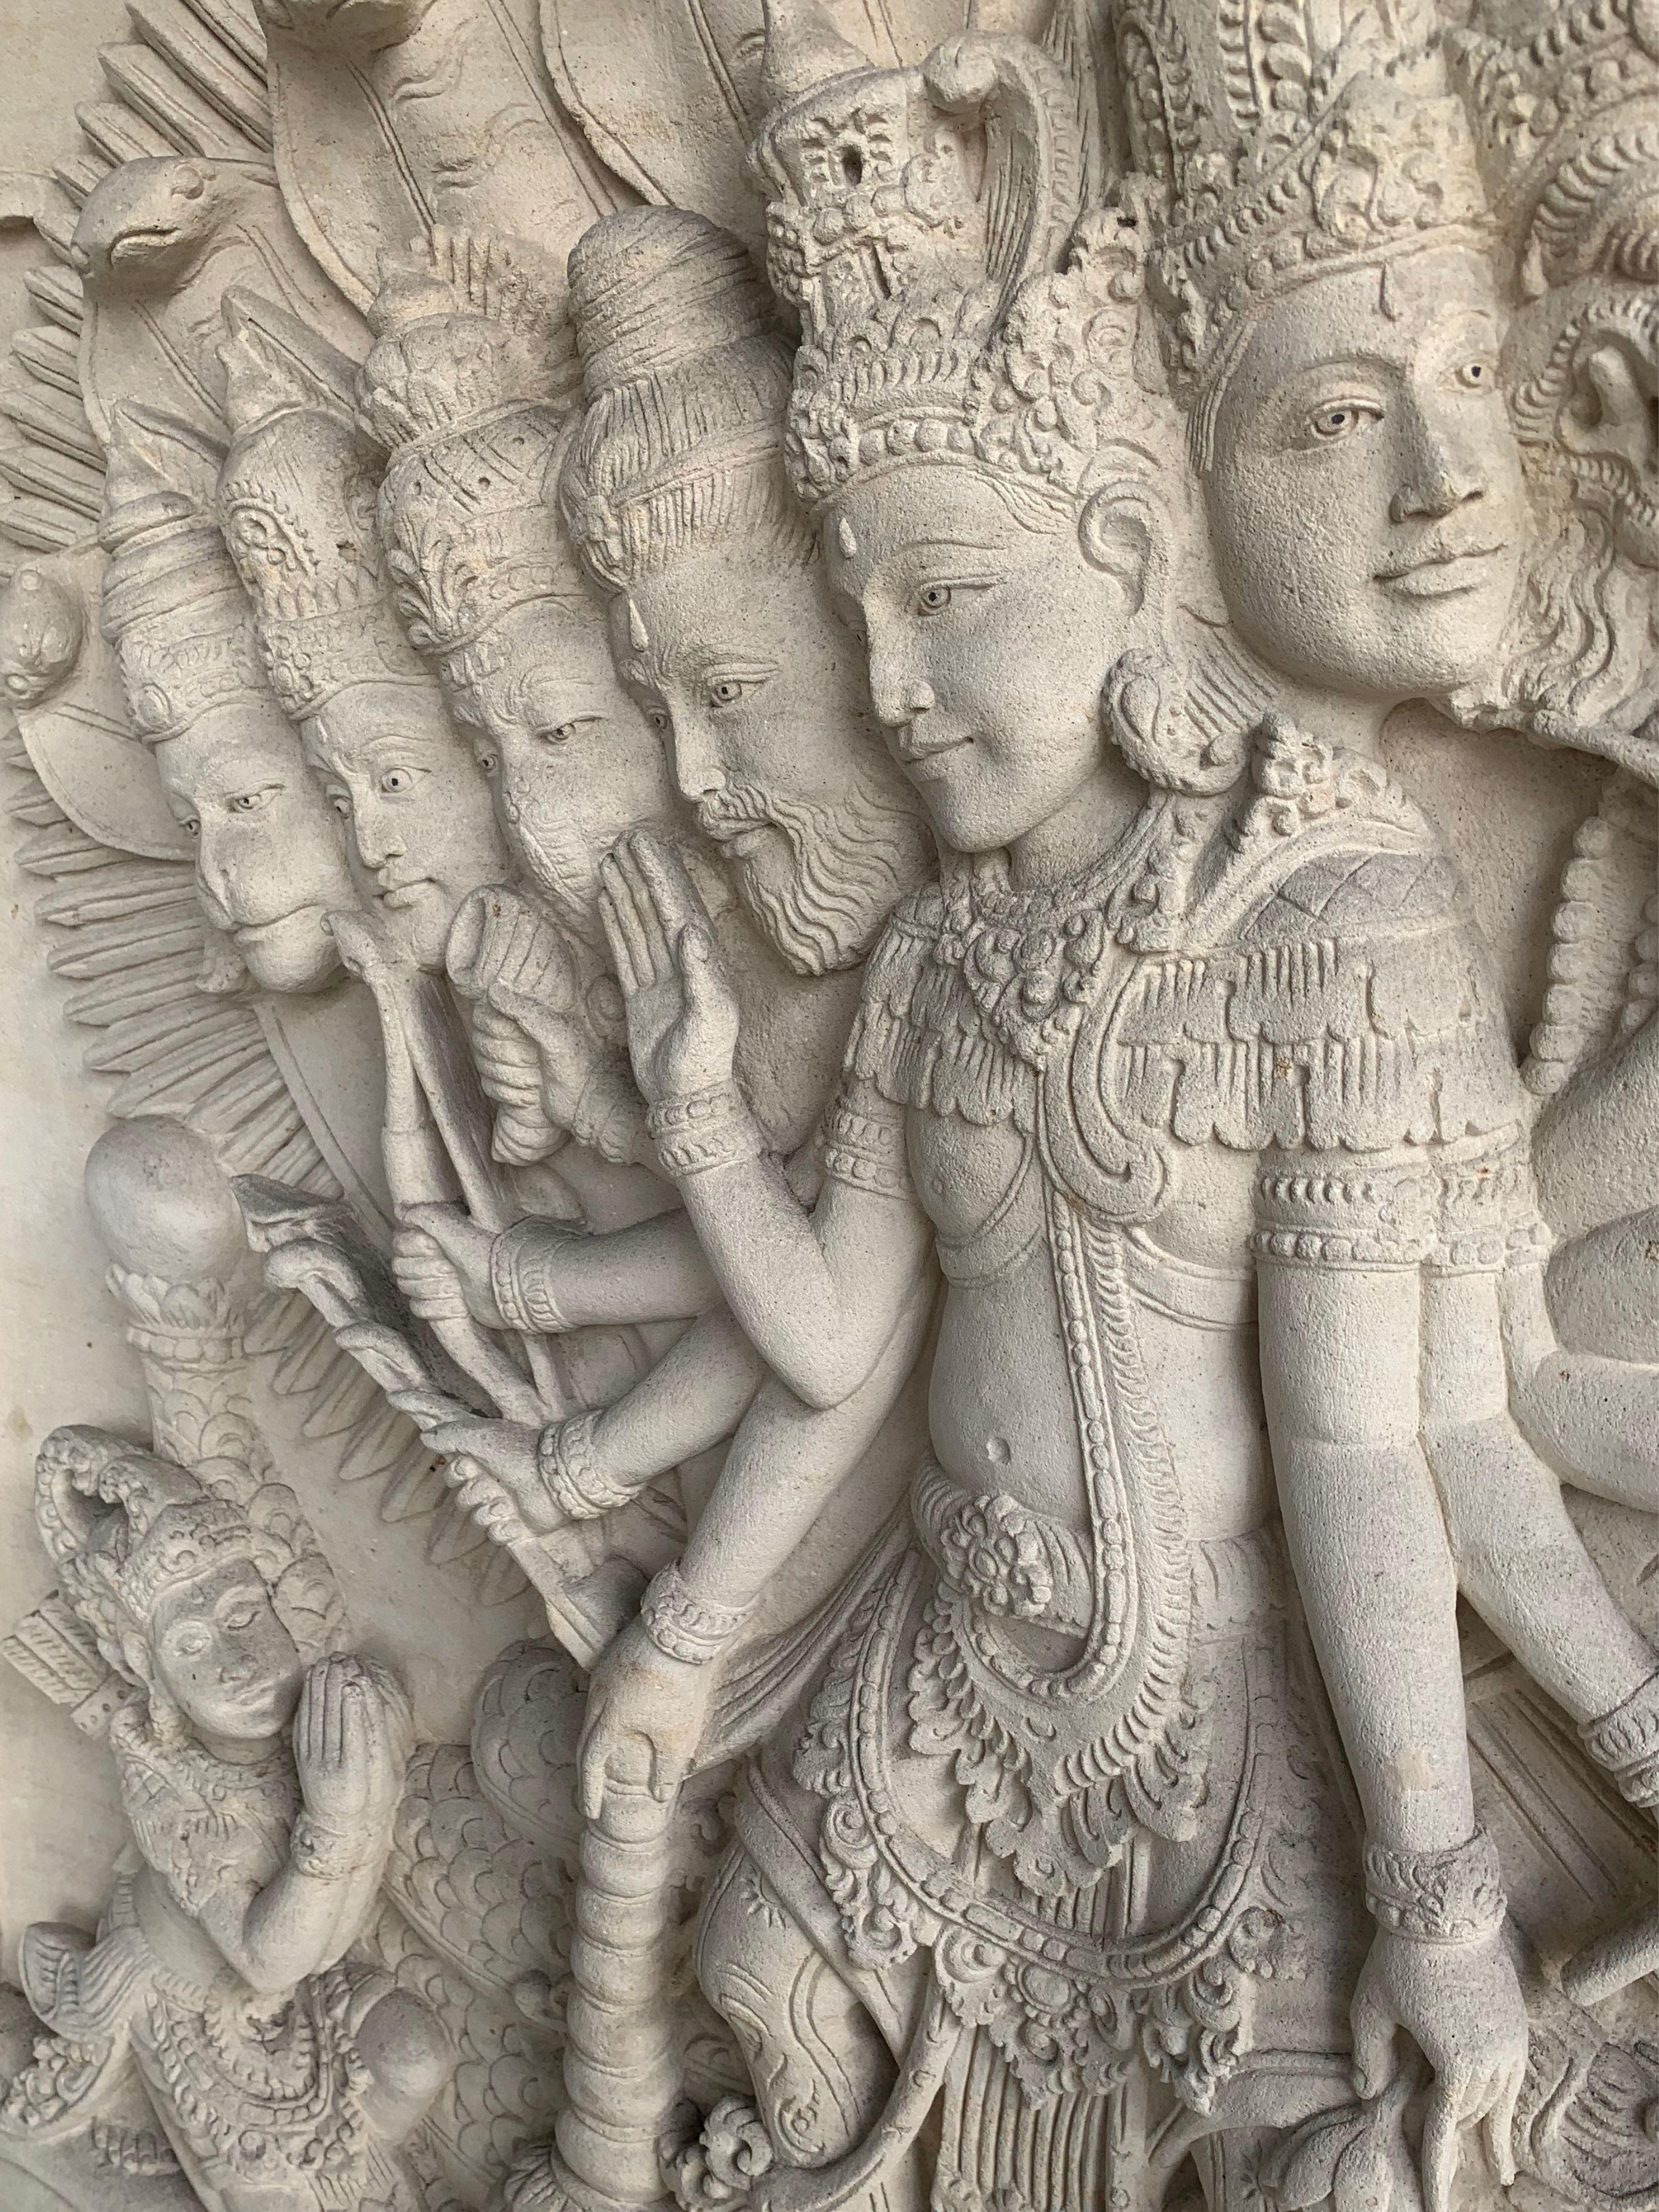 Contemporary Hand-Carved Sandstone Carving with Hindu Gods from Bali